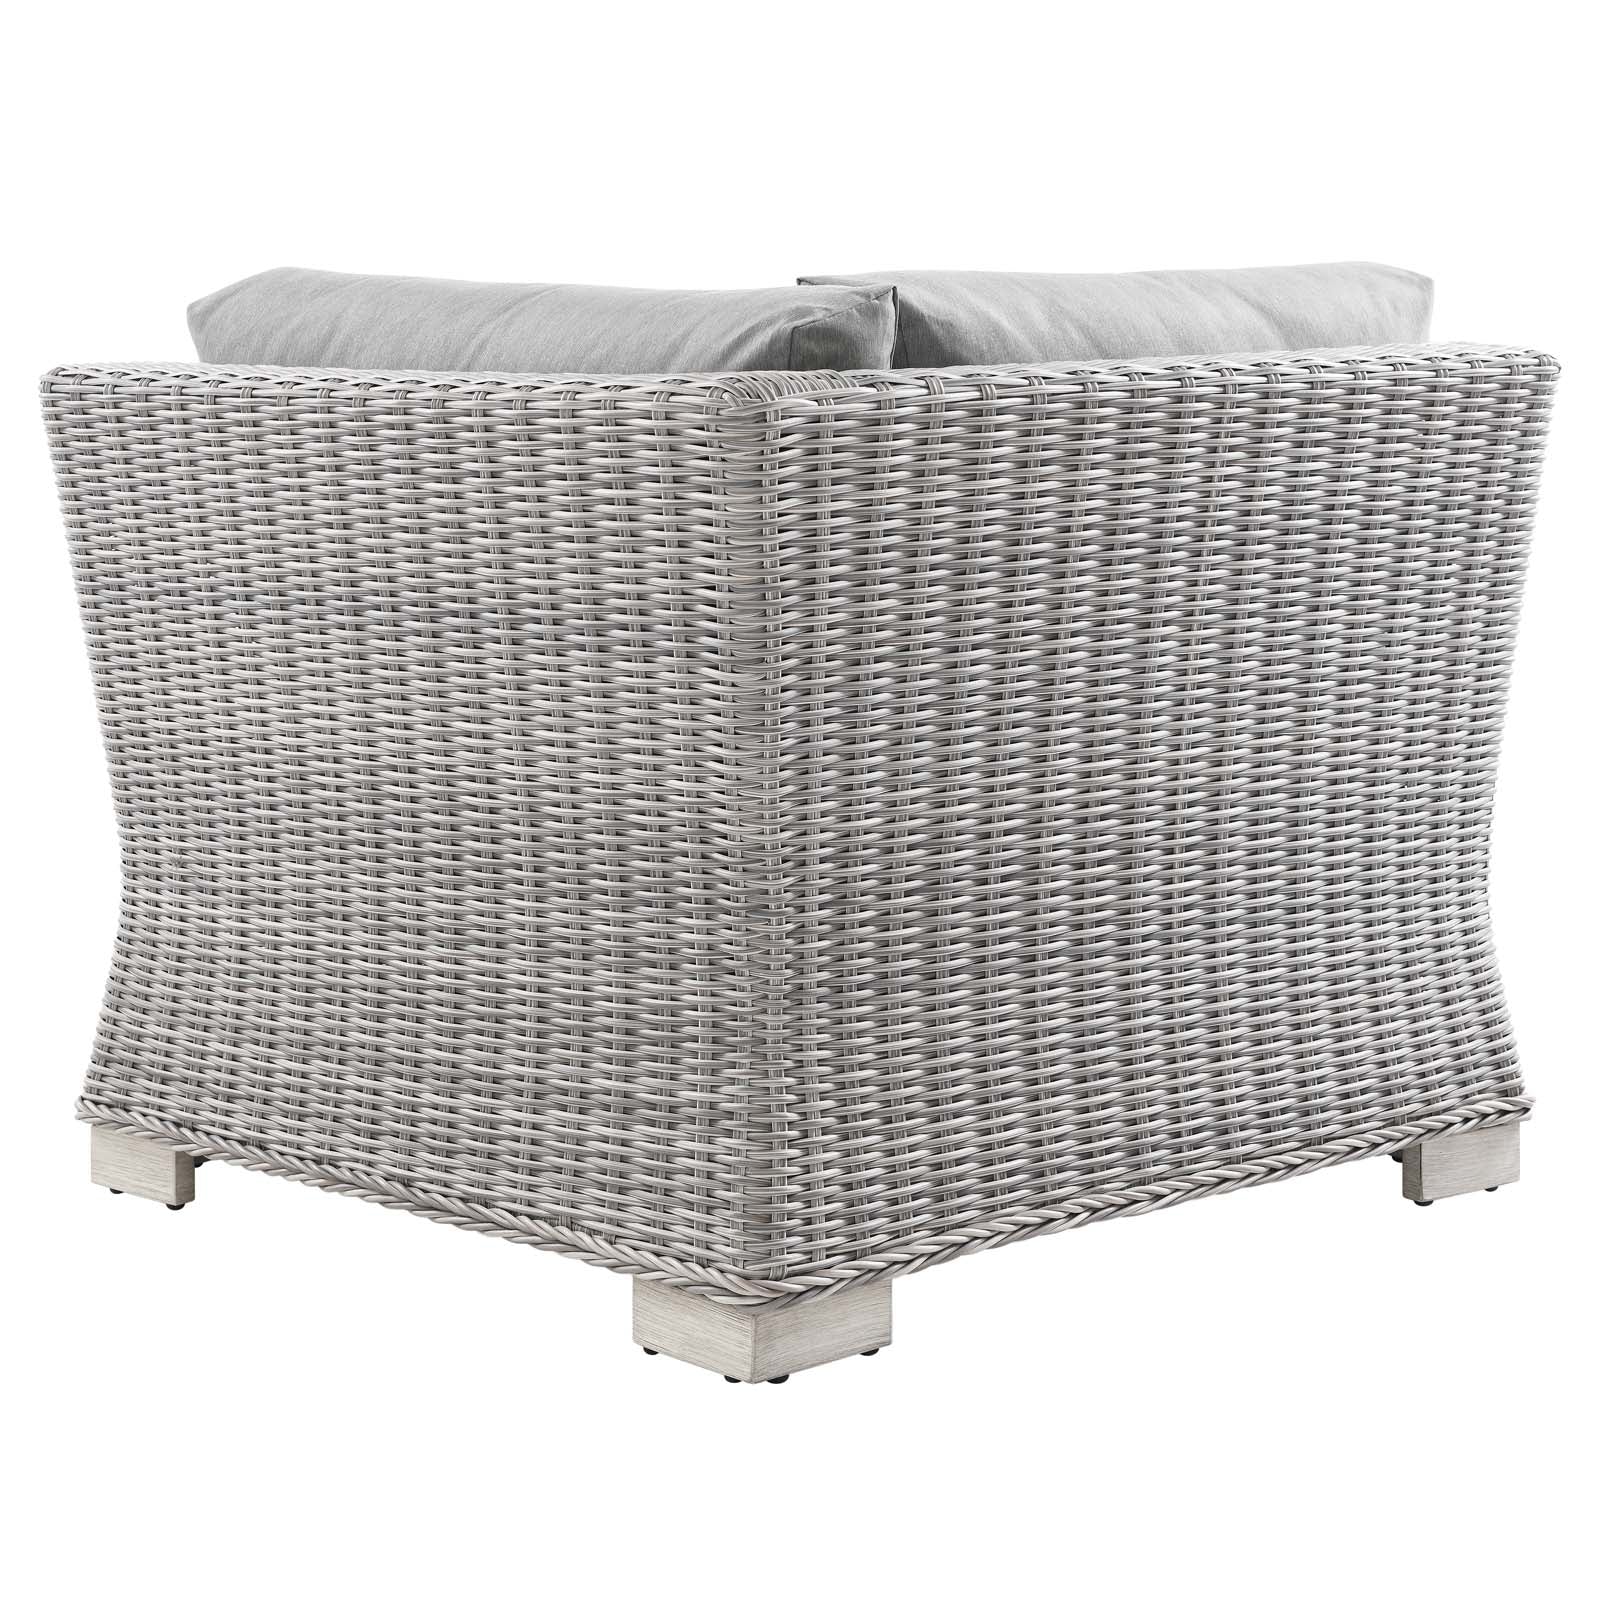 Modway Outdoor Chairs - Conway Outdoor Patio Wicker Rattan Corner Chair Light Gray